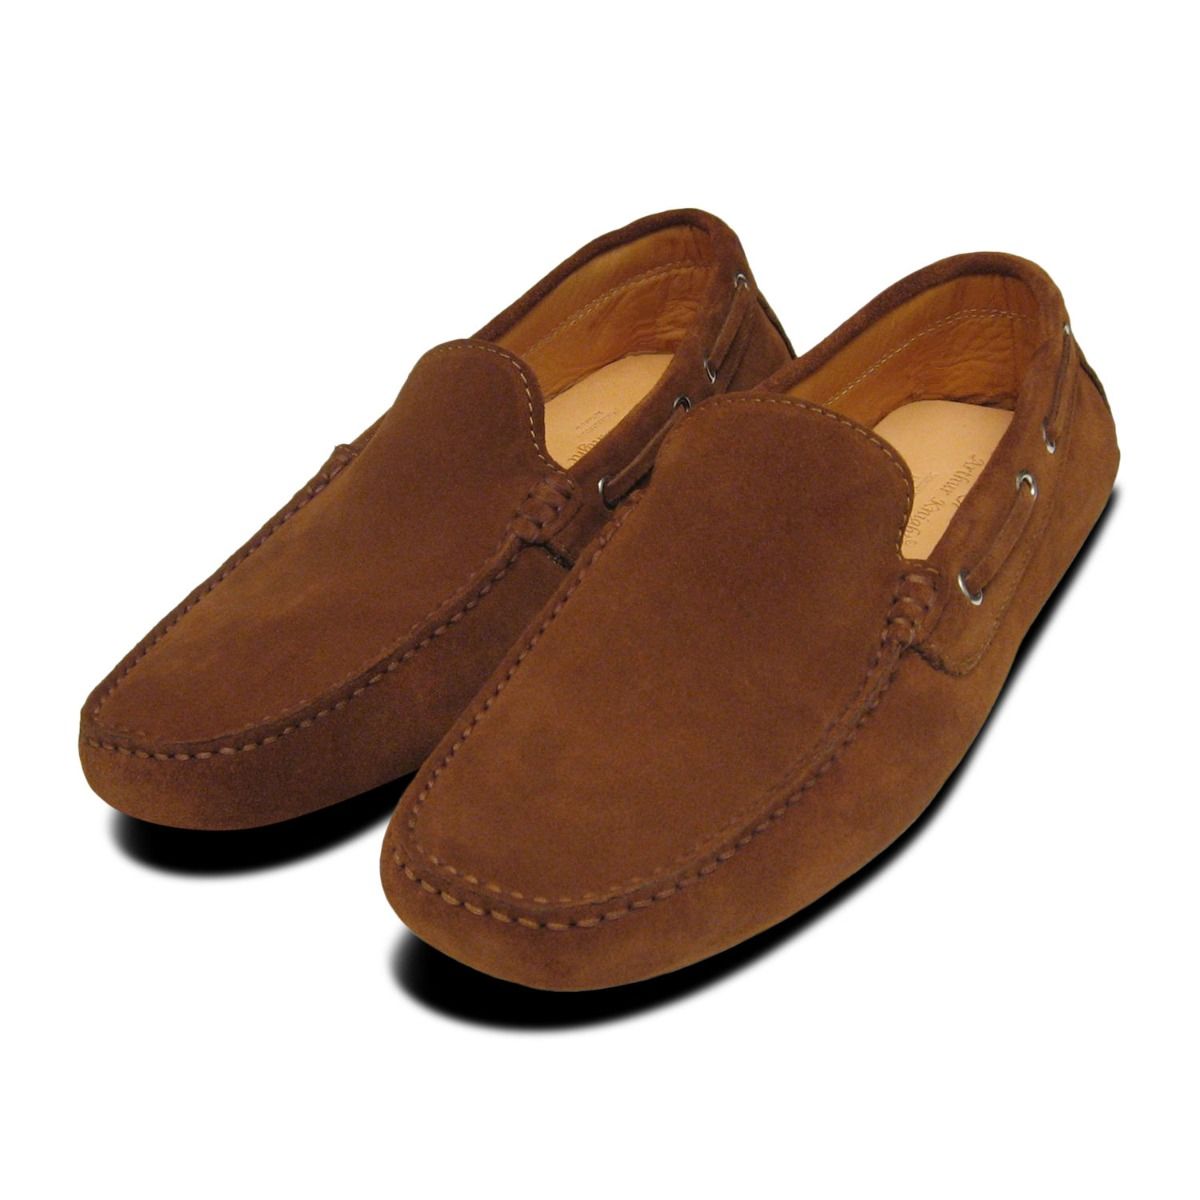 suede moccasin shoes mens